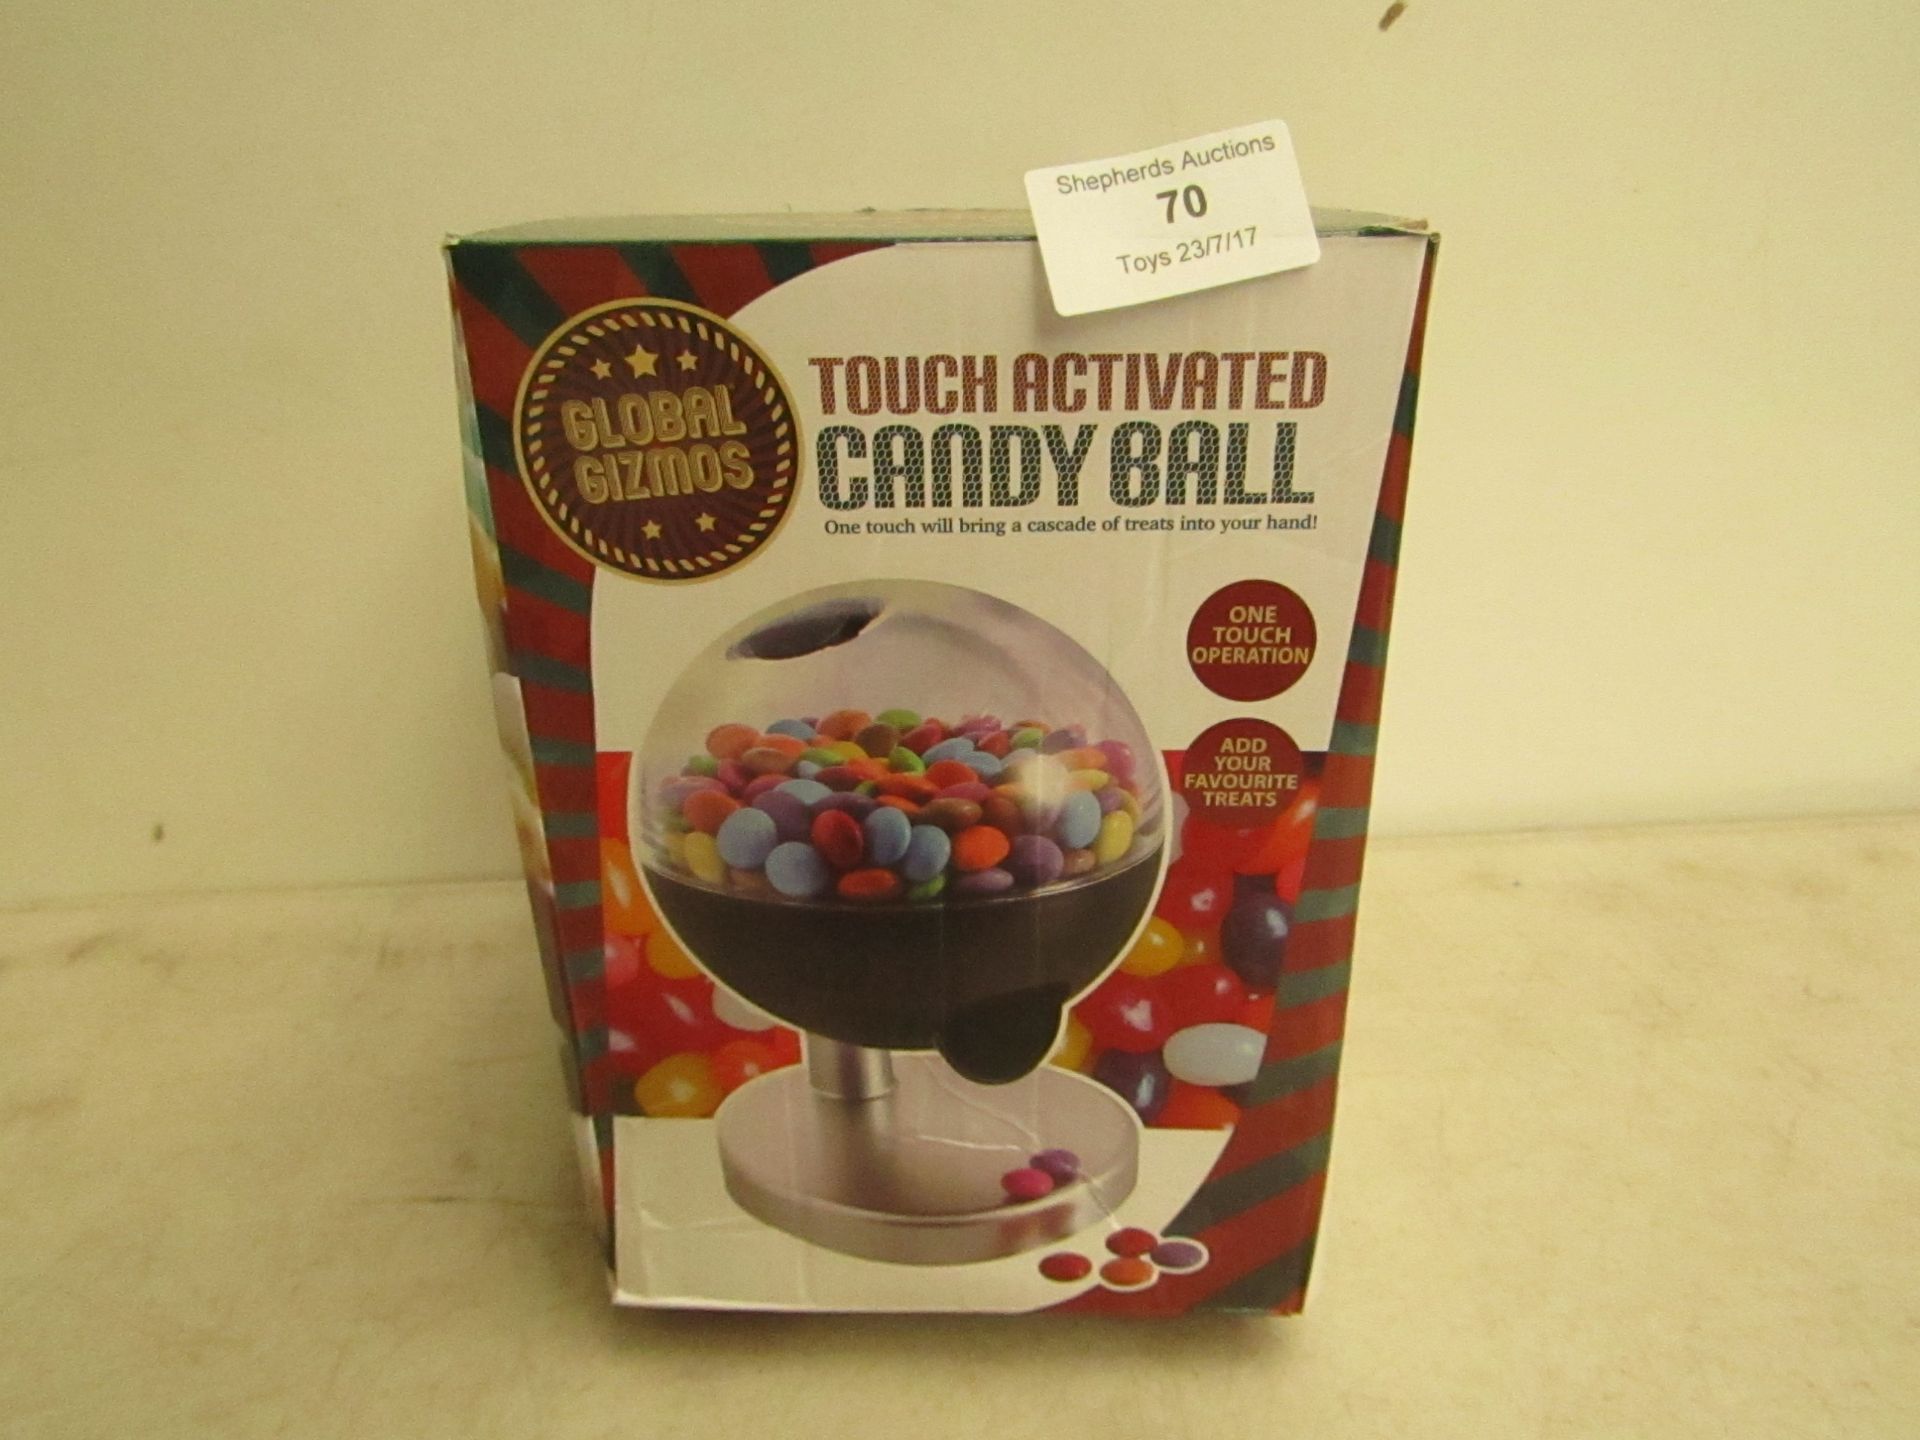 Touch activated candy ball, unchecked and boxed.